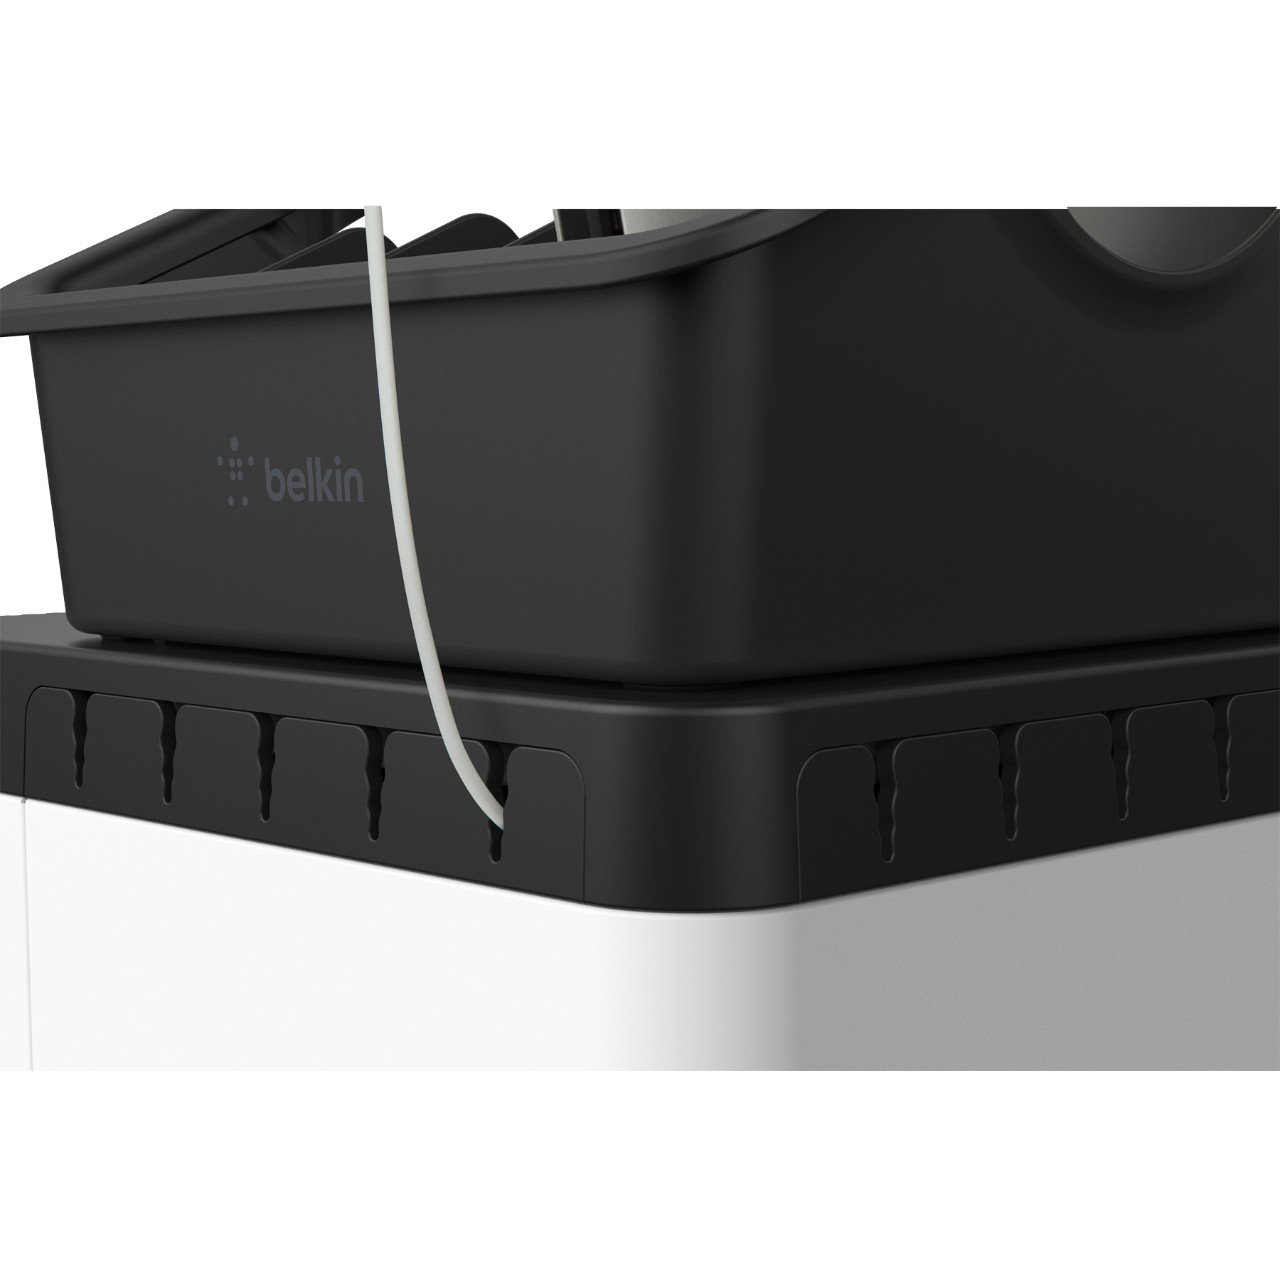 Belkin Store and Charge Go With Portable Trays - AC Classroom Charging Station for Laptops & Tablets - Classroom Organization & Charging Station - Up To 10 Devices Including iPads, Tablets & More